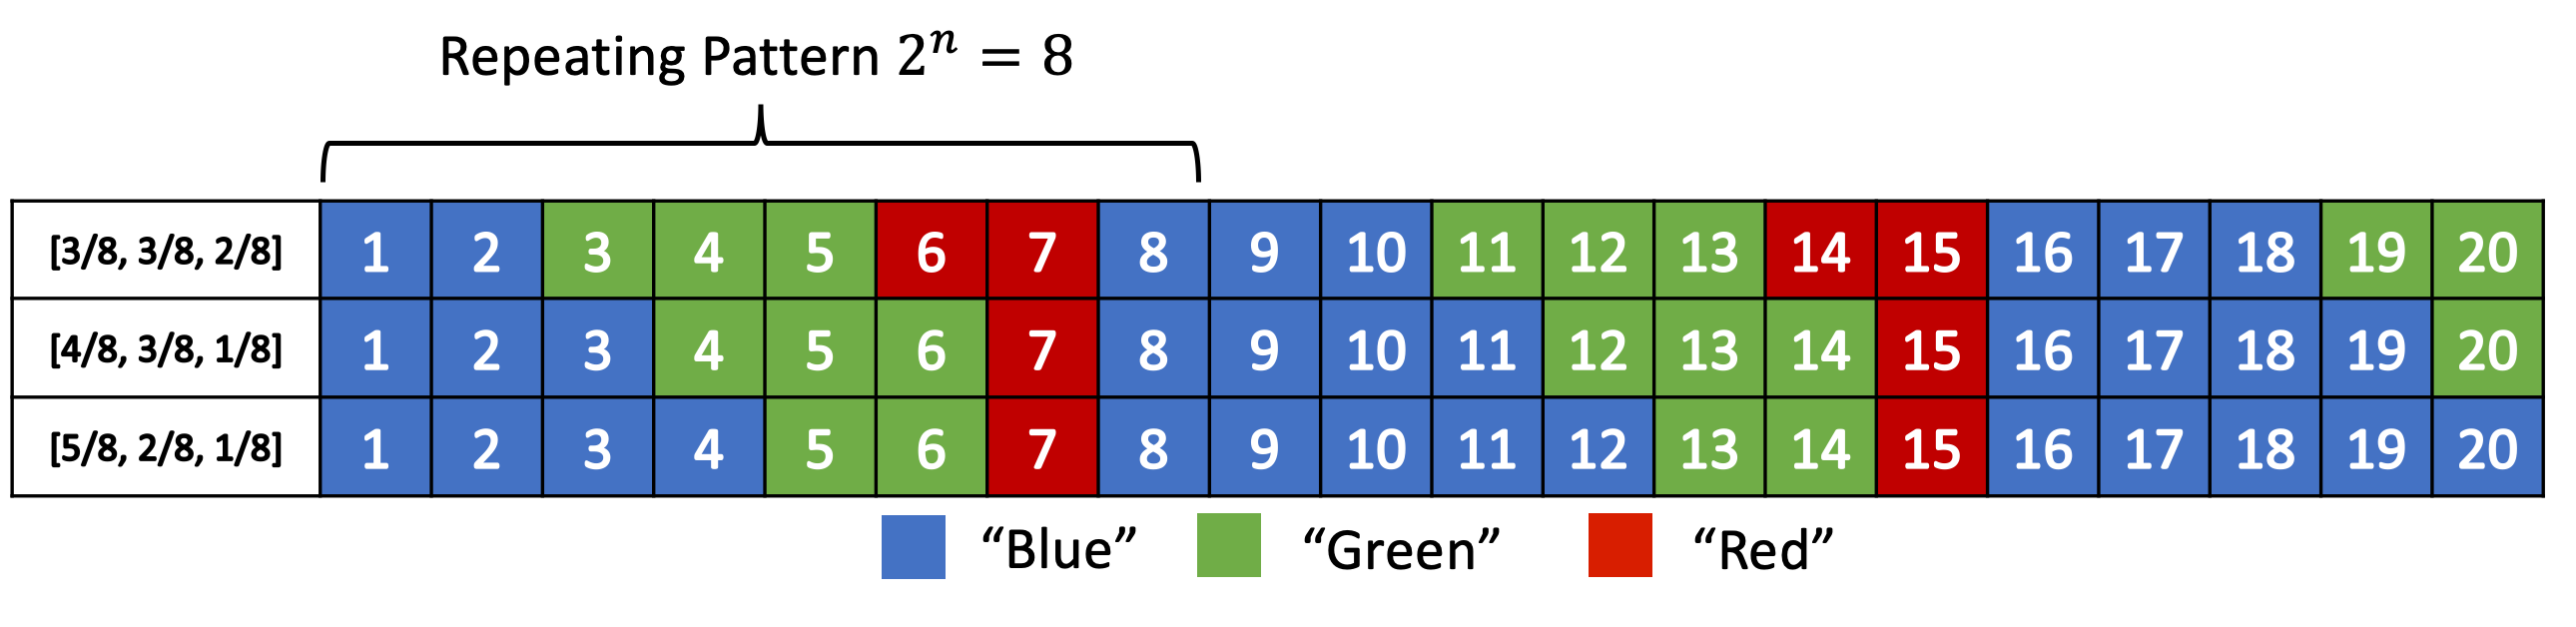 Distribution of "blue", "green" and "red" symbols